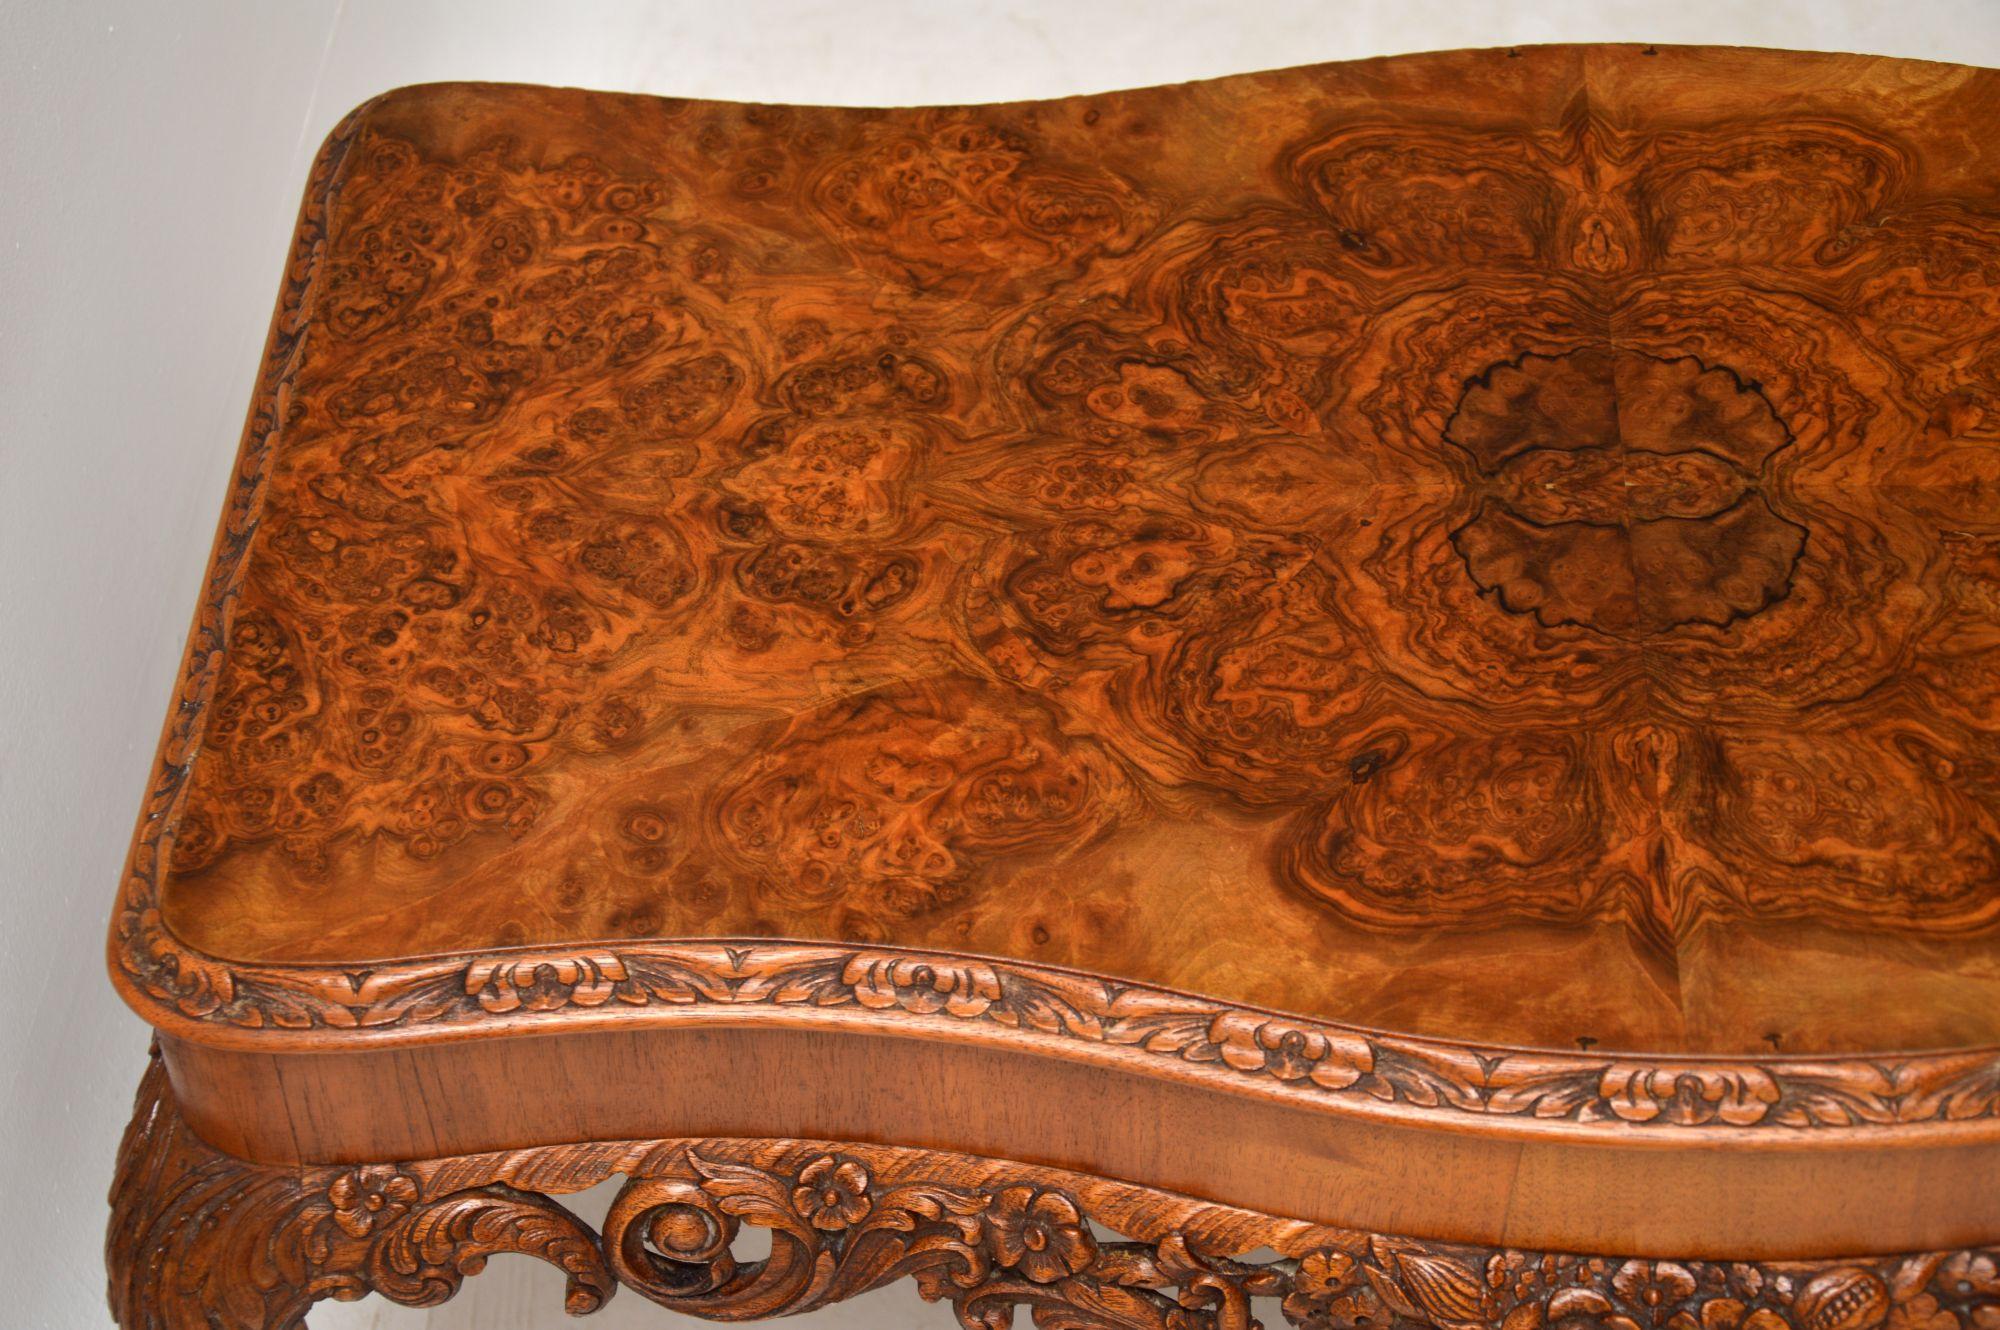 Antique Burr Walnut Queen Anne Style Coffee Table 3